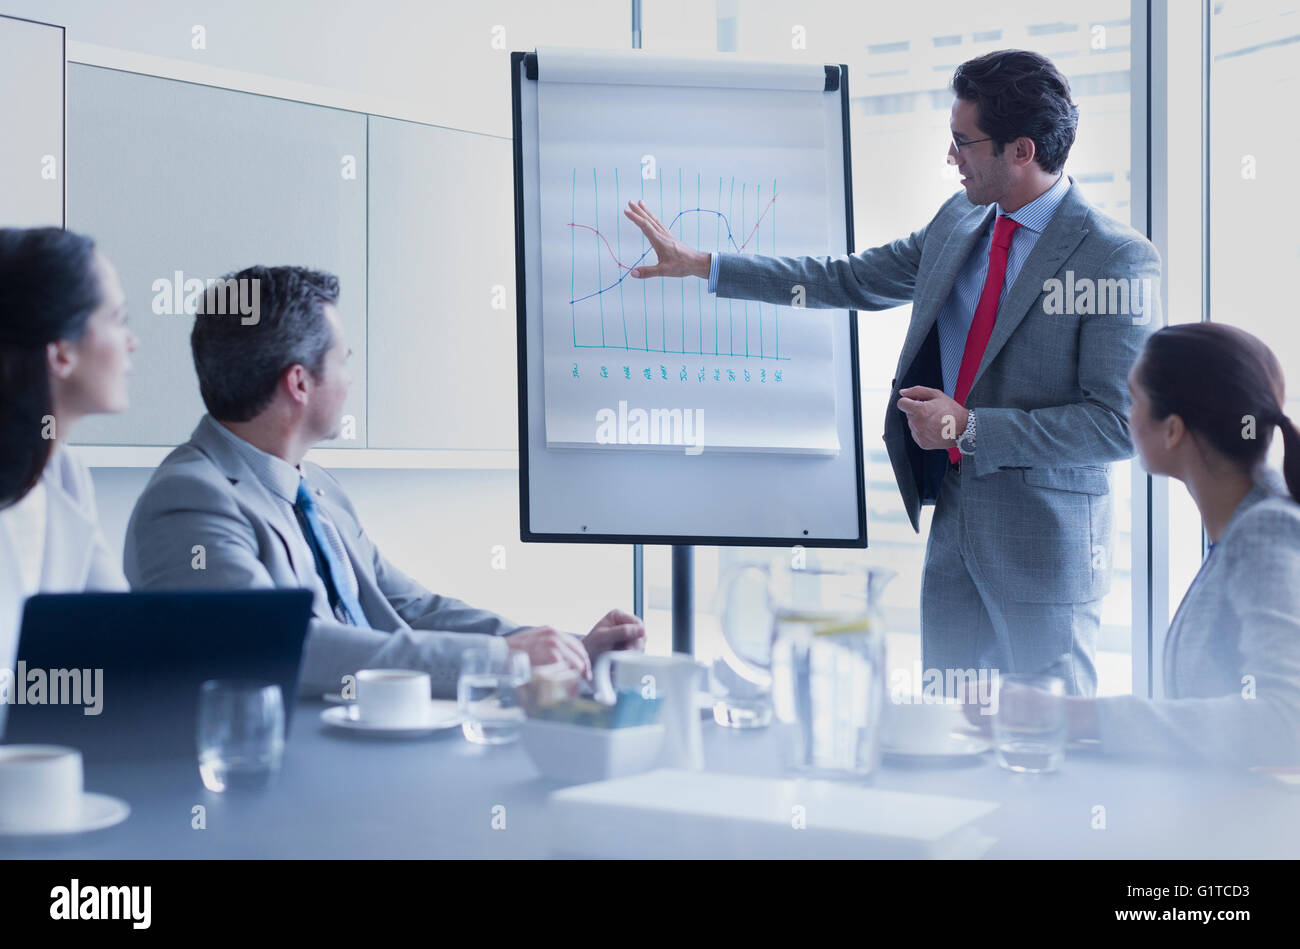 Businessman leading meeting at flip chart in conference room Stock Photo